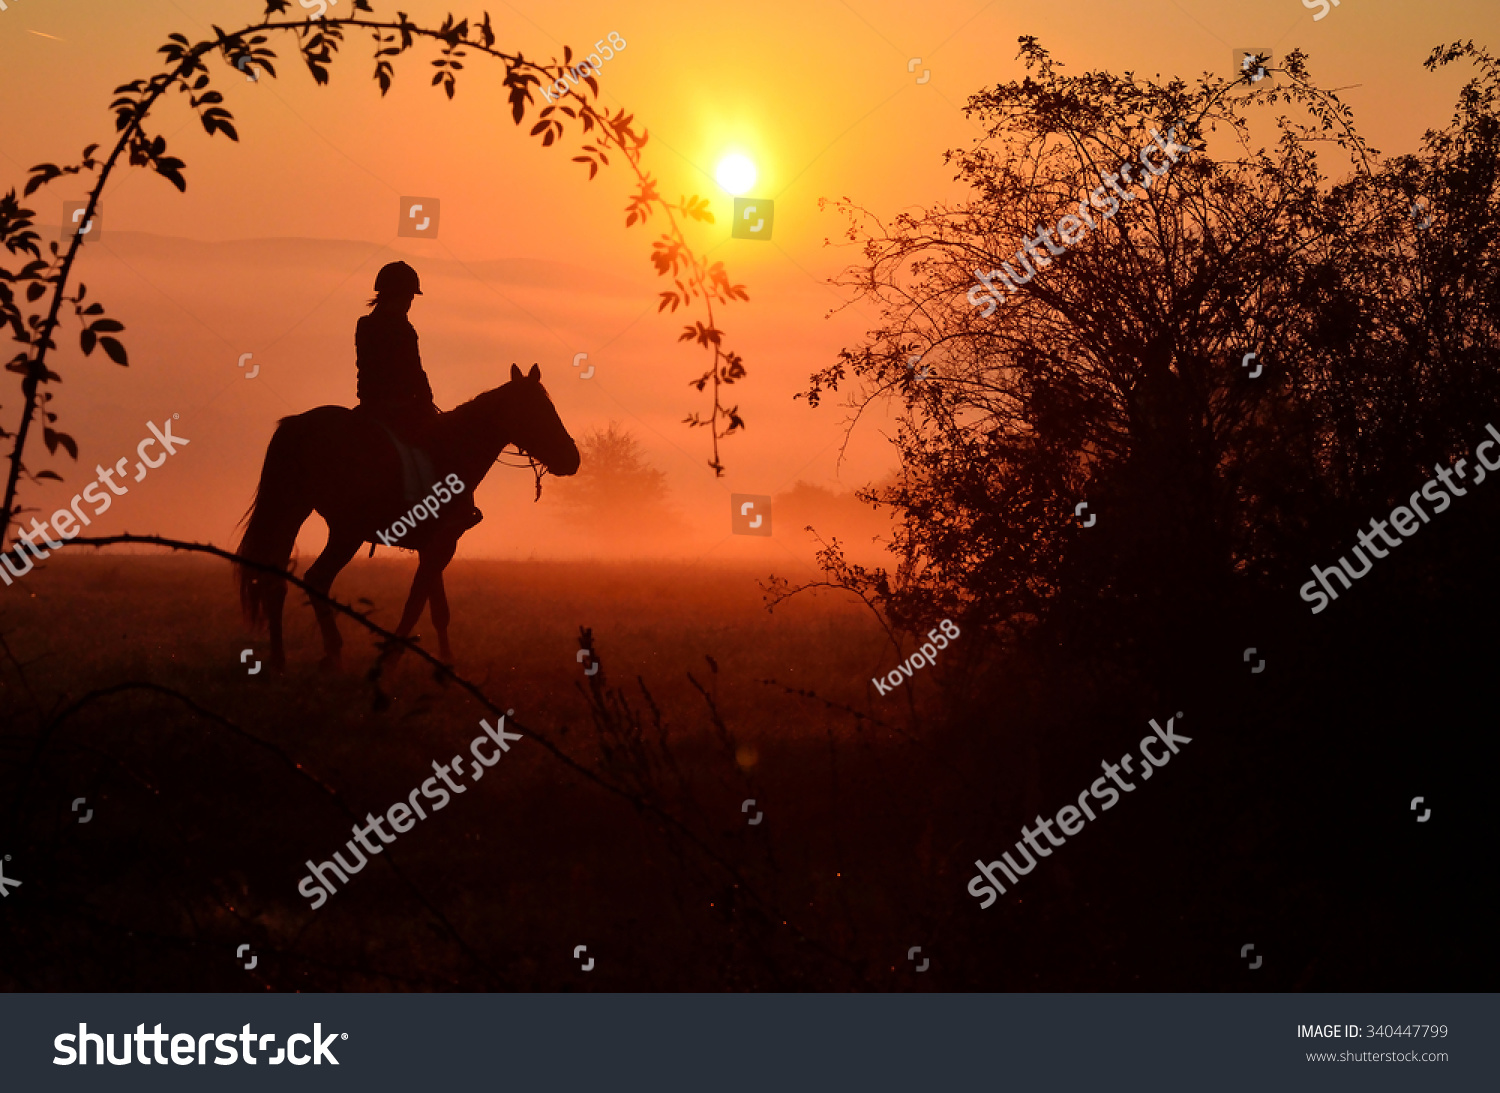 Young girl riding on horse during wonderful calm and peaceful autumn morning full of mist and gold light on the meadow in slovakia